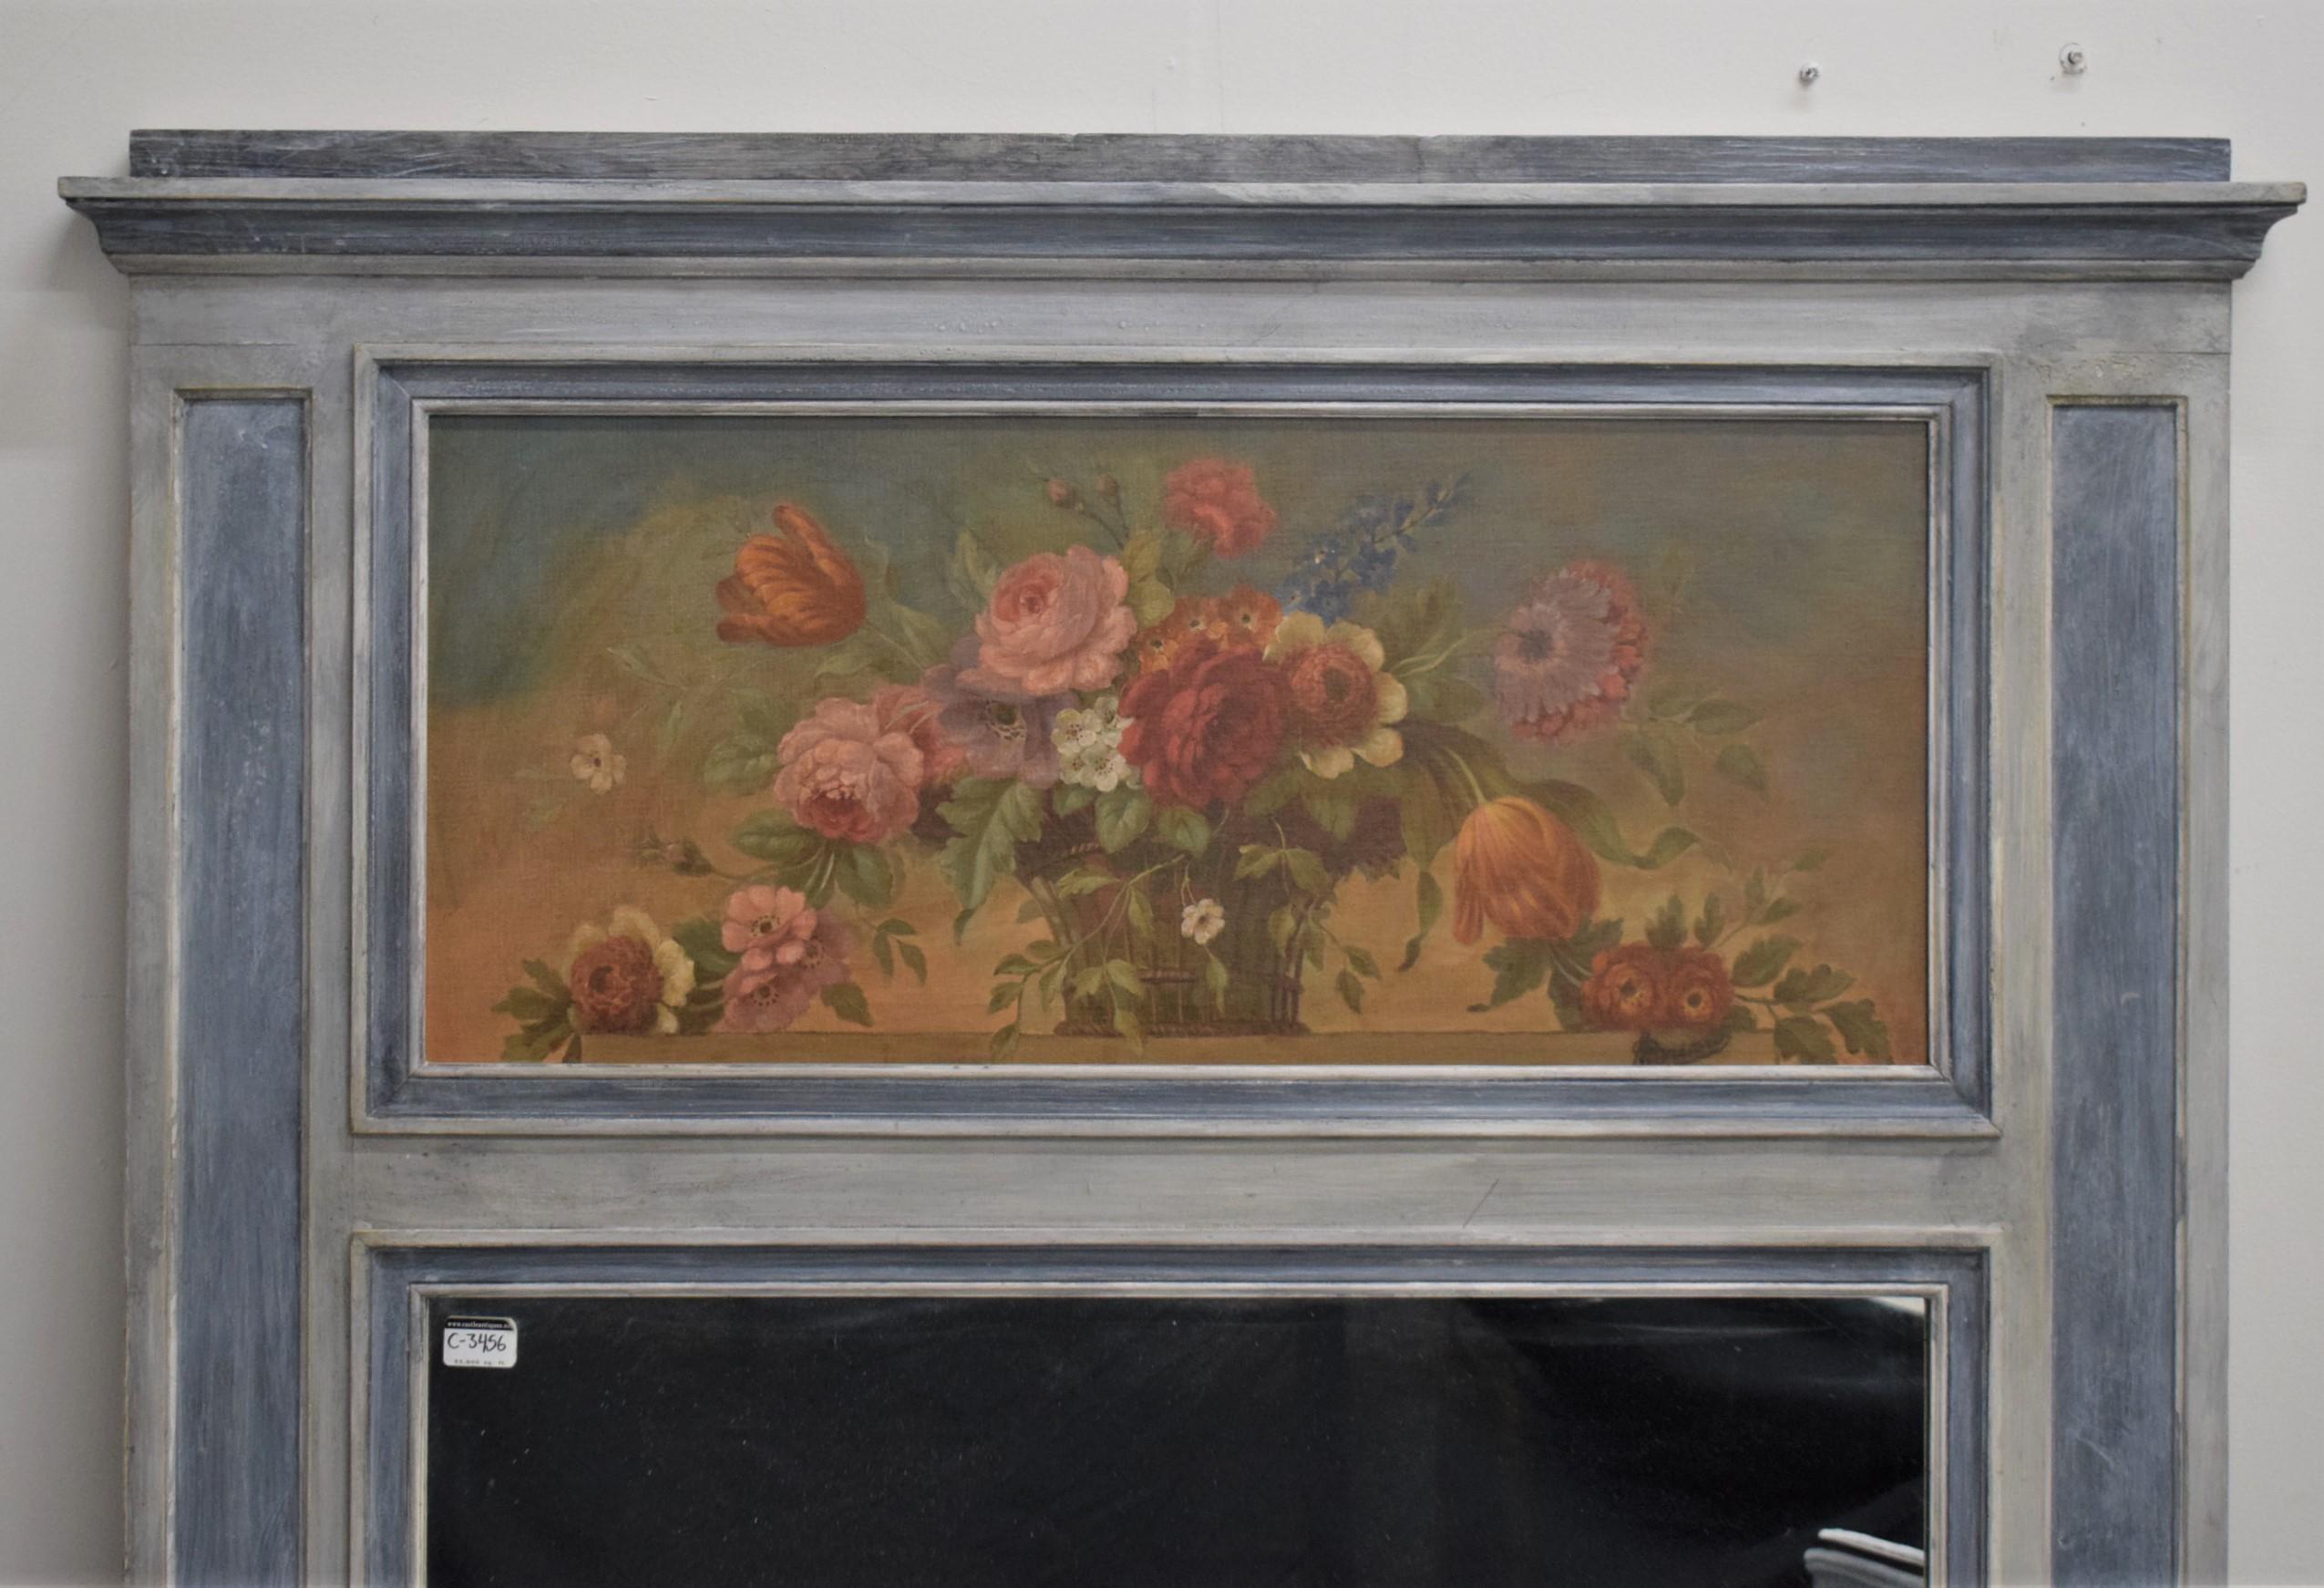 Lacquered Restored 1950s French Trumeau Mirror with Floral Painting - Vintage Elegance For Sale